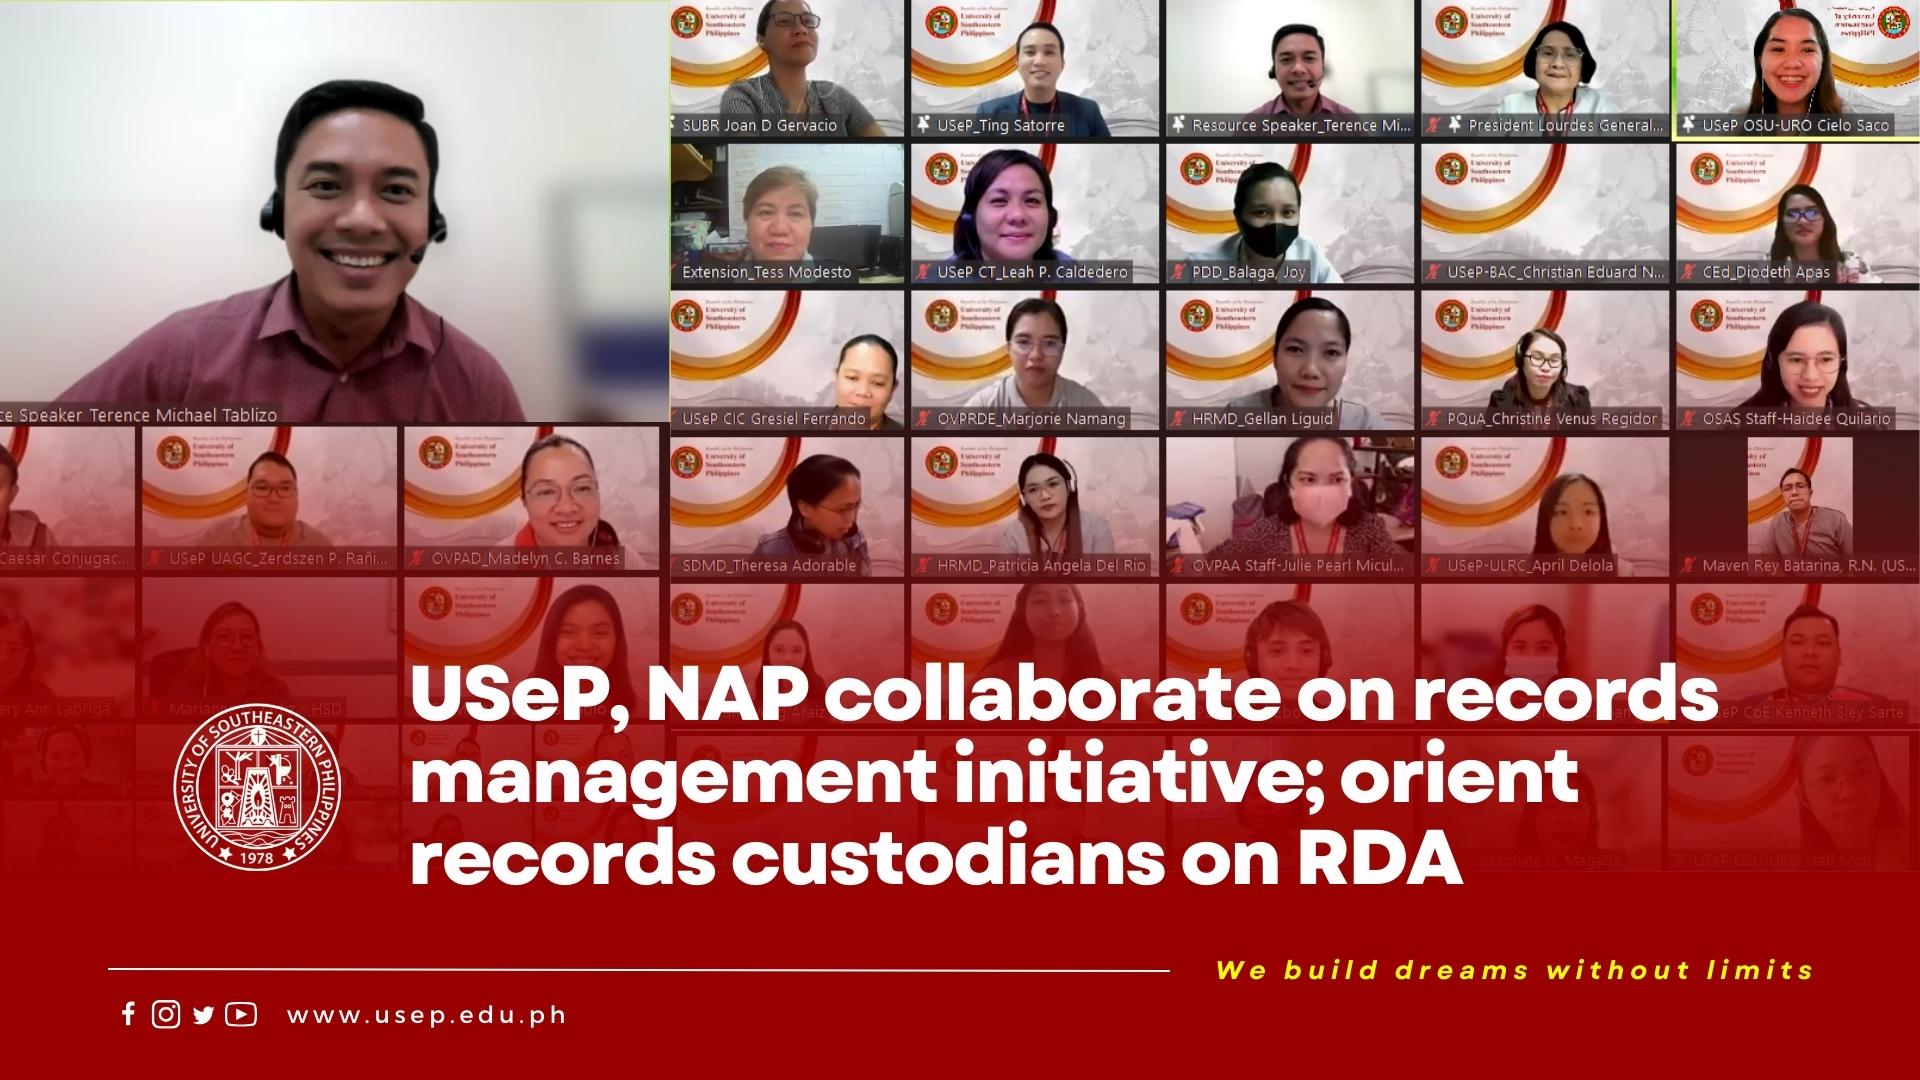 USeP, NAP collaborate on records management initiative; orient records custodians on RDA